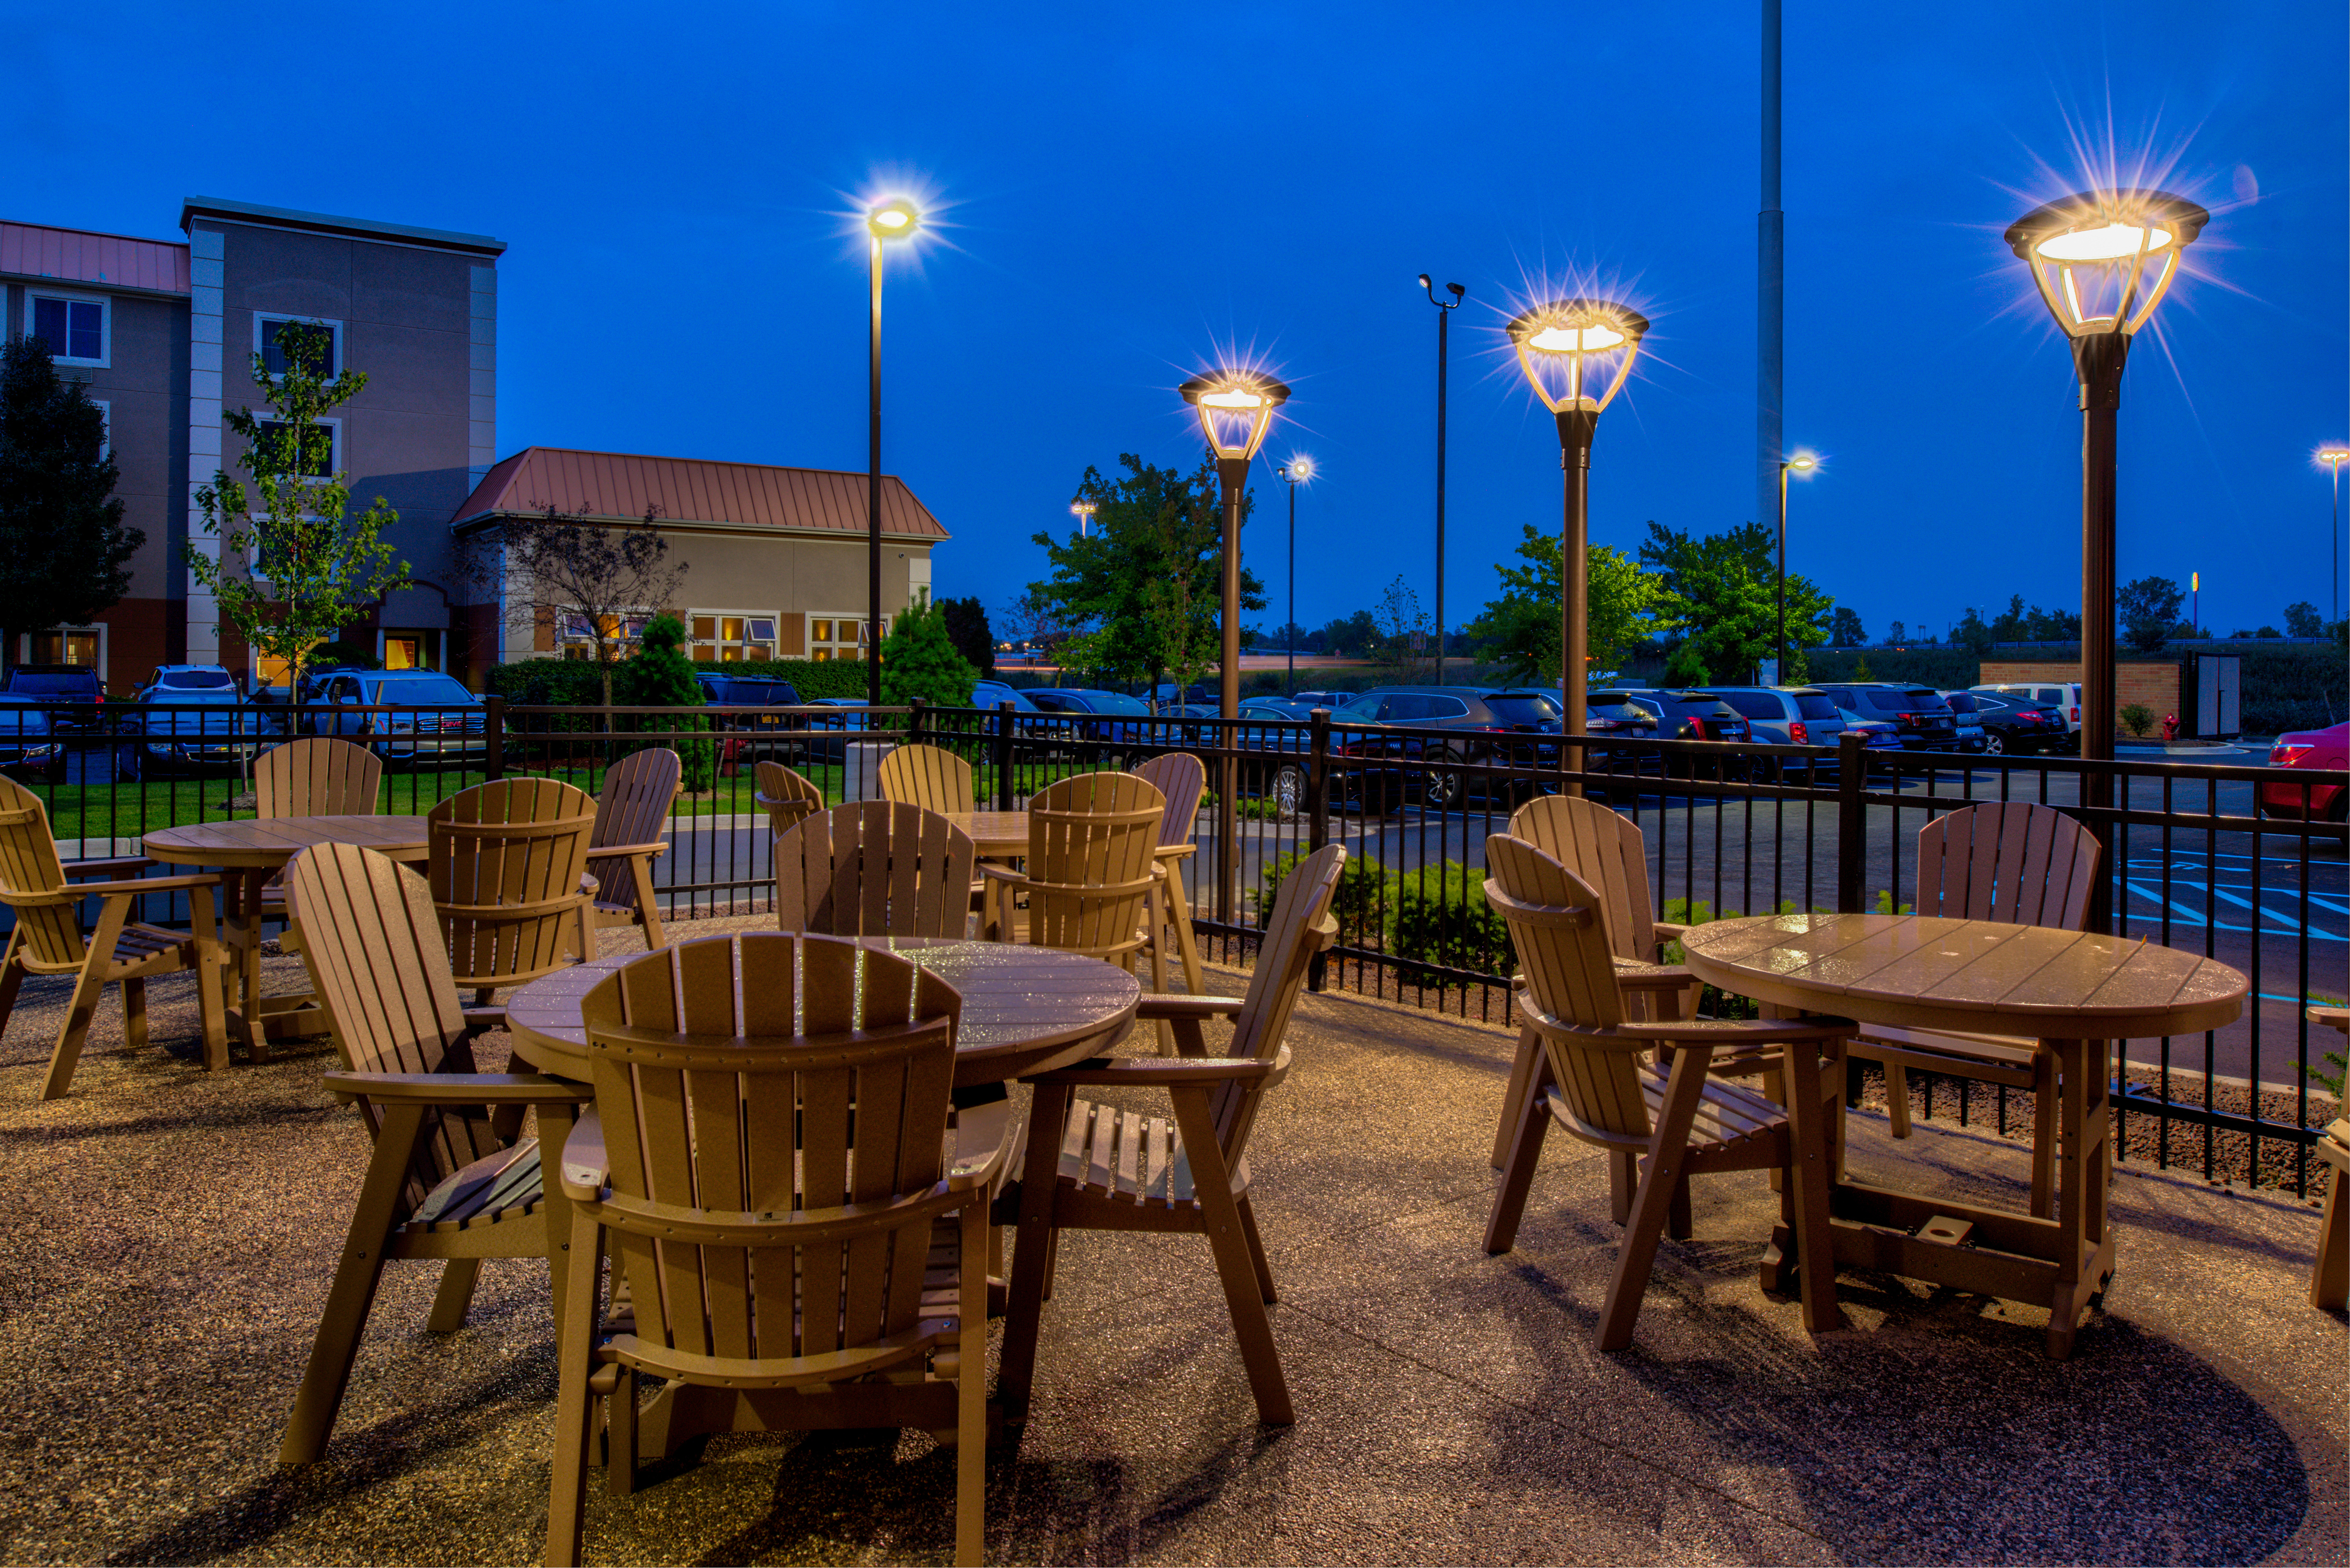 Outdoor Dining Area Deck Chairs and Table at Night